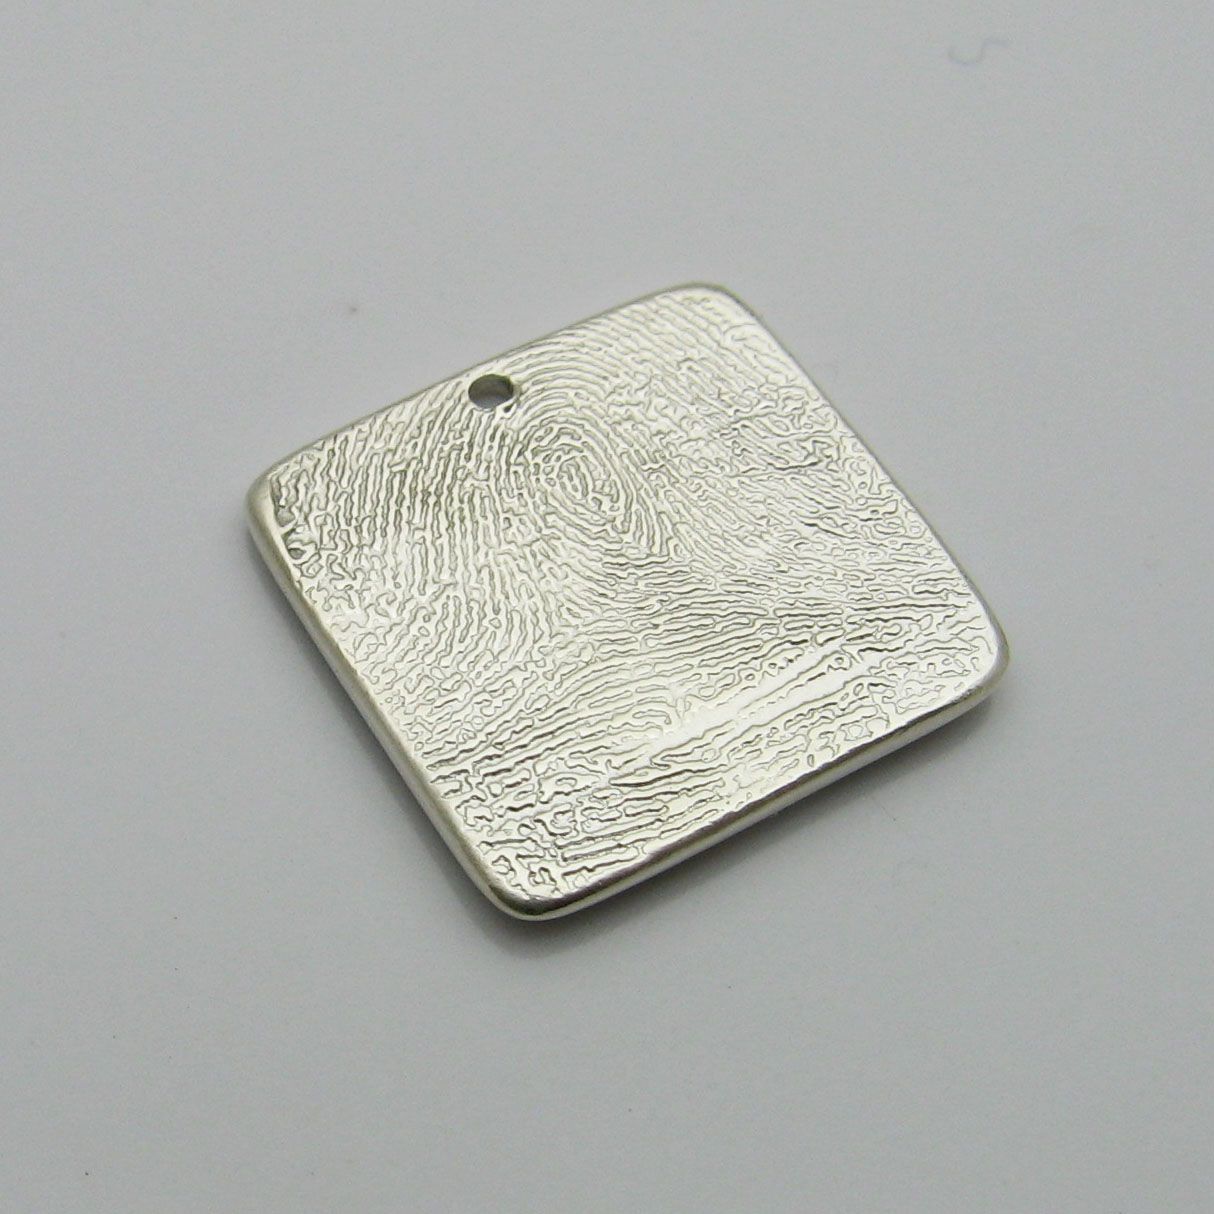 Buy a Custom Personalized Silver Fingerprint Square Charm Or Pendant ...